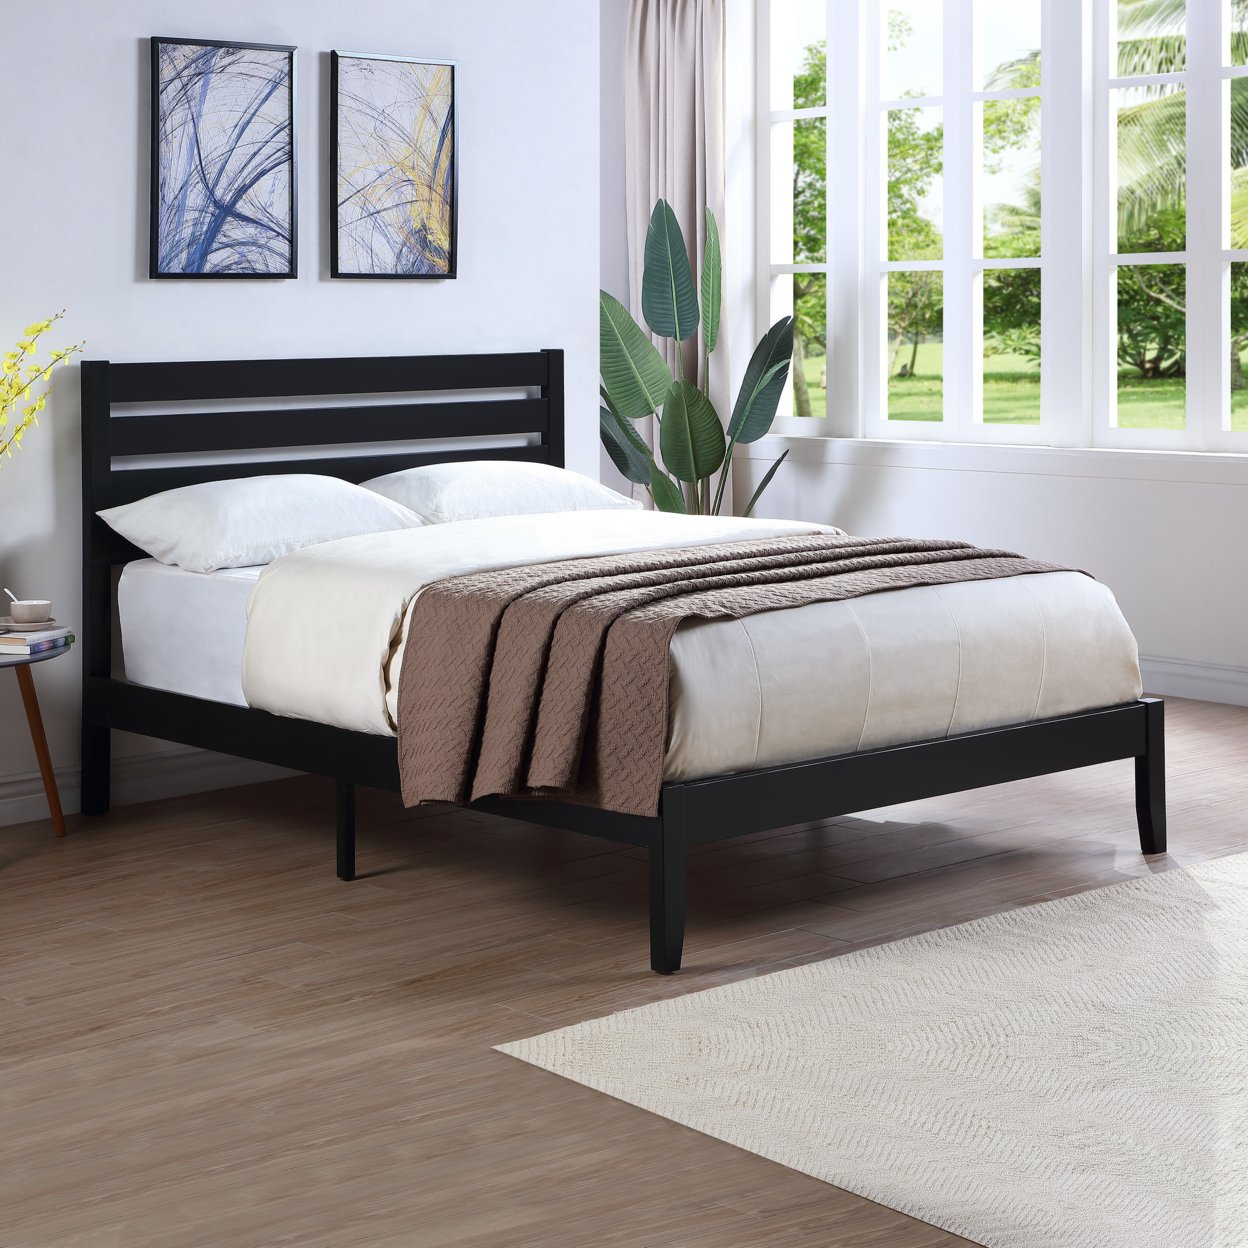 Kenley Queen Size Bed With Headboard - Black Finish + Natural